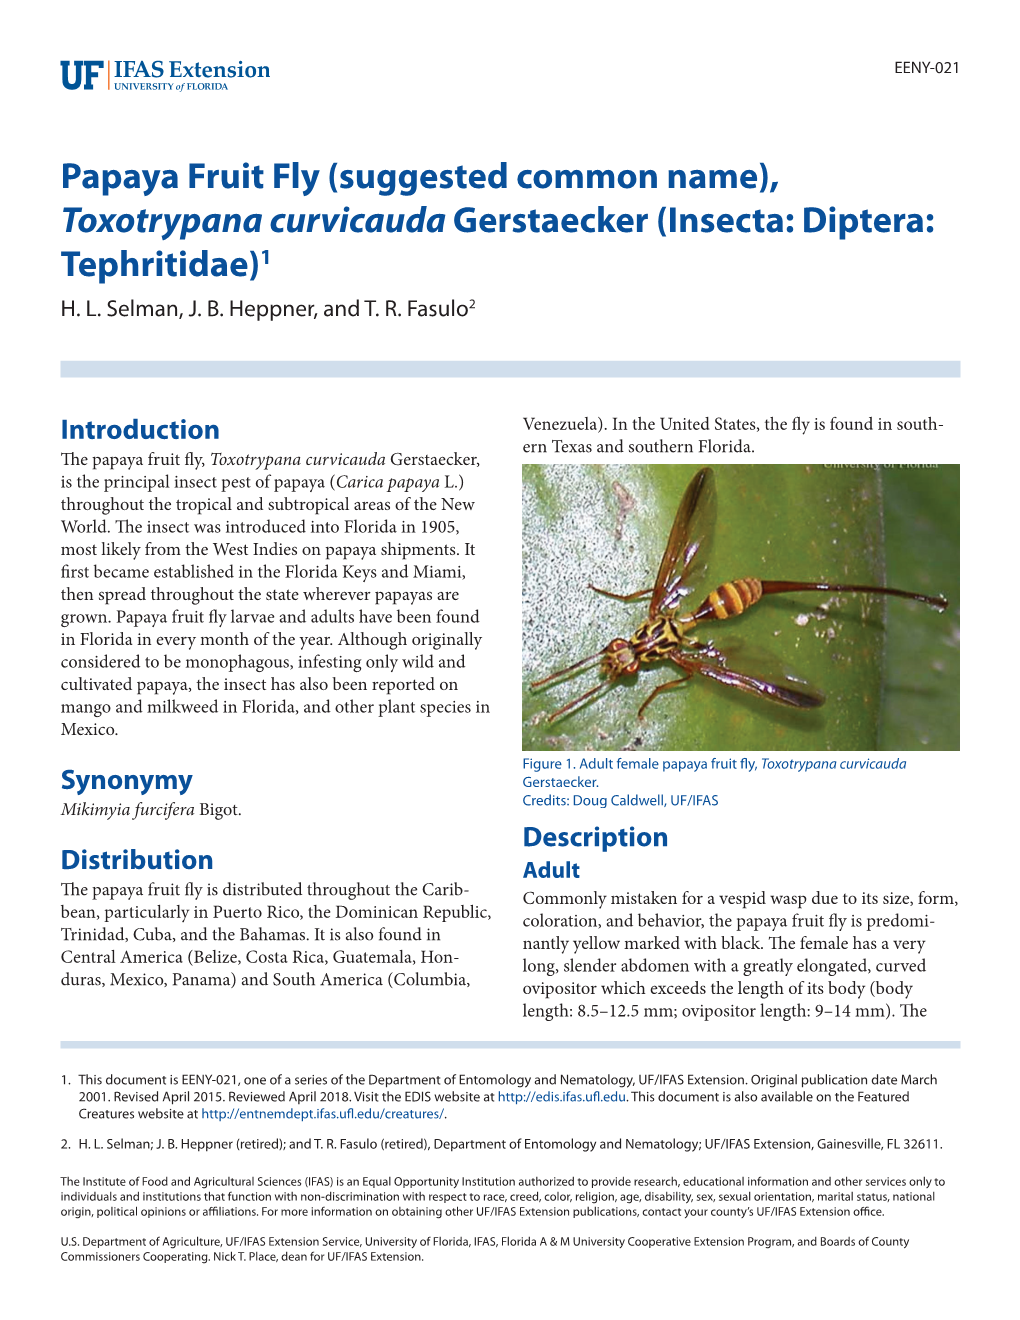 Papaya Fruit Fly (Suggested Common Name), Toxotrypana Curvicauda Gerstaecker (Insecta: Diptera: Tephritidae)1 H